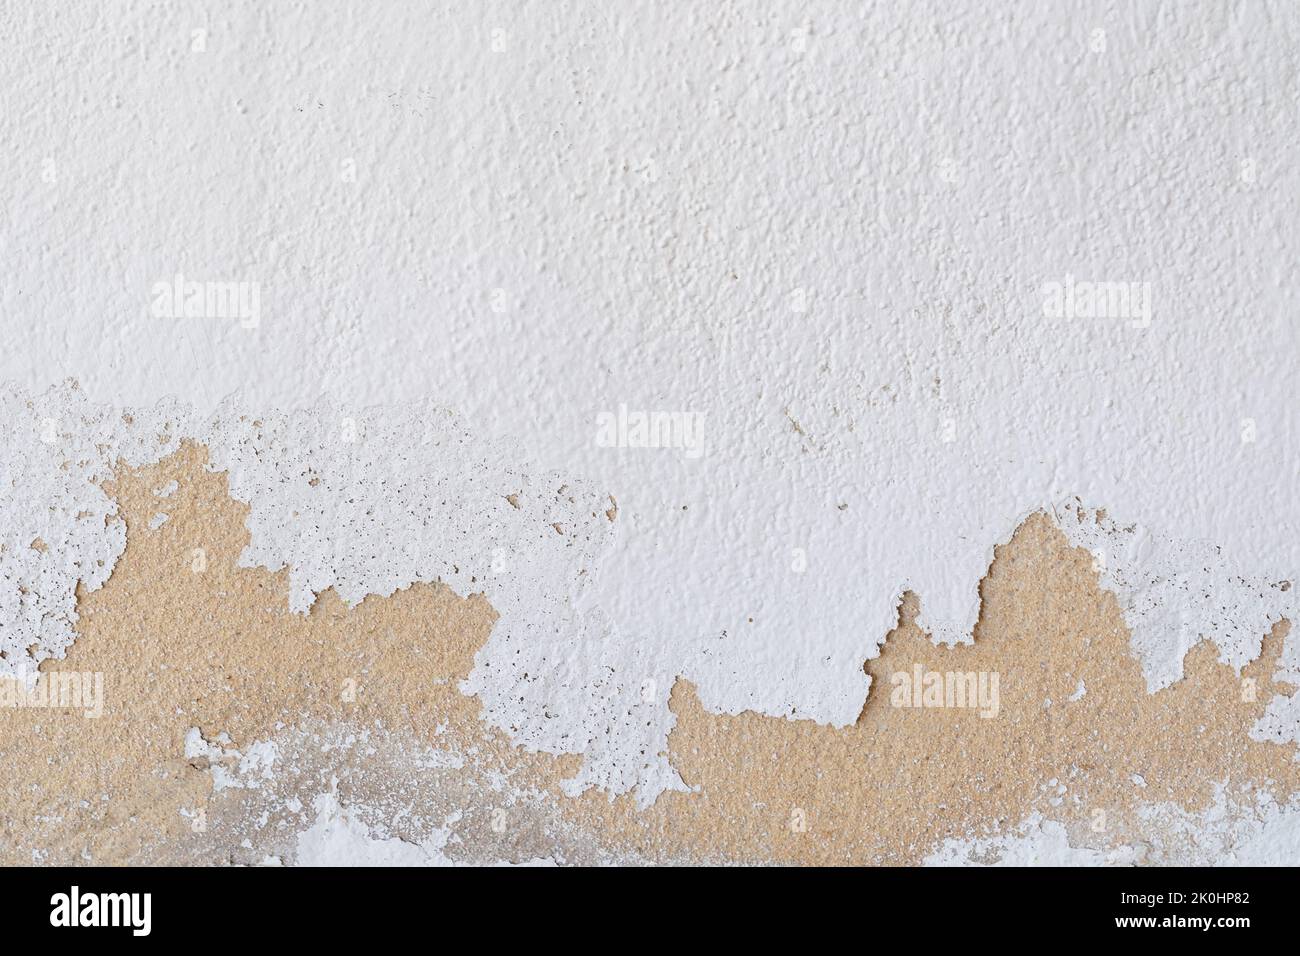 Concrete grunge background old wall style vintage texture Stock Photo